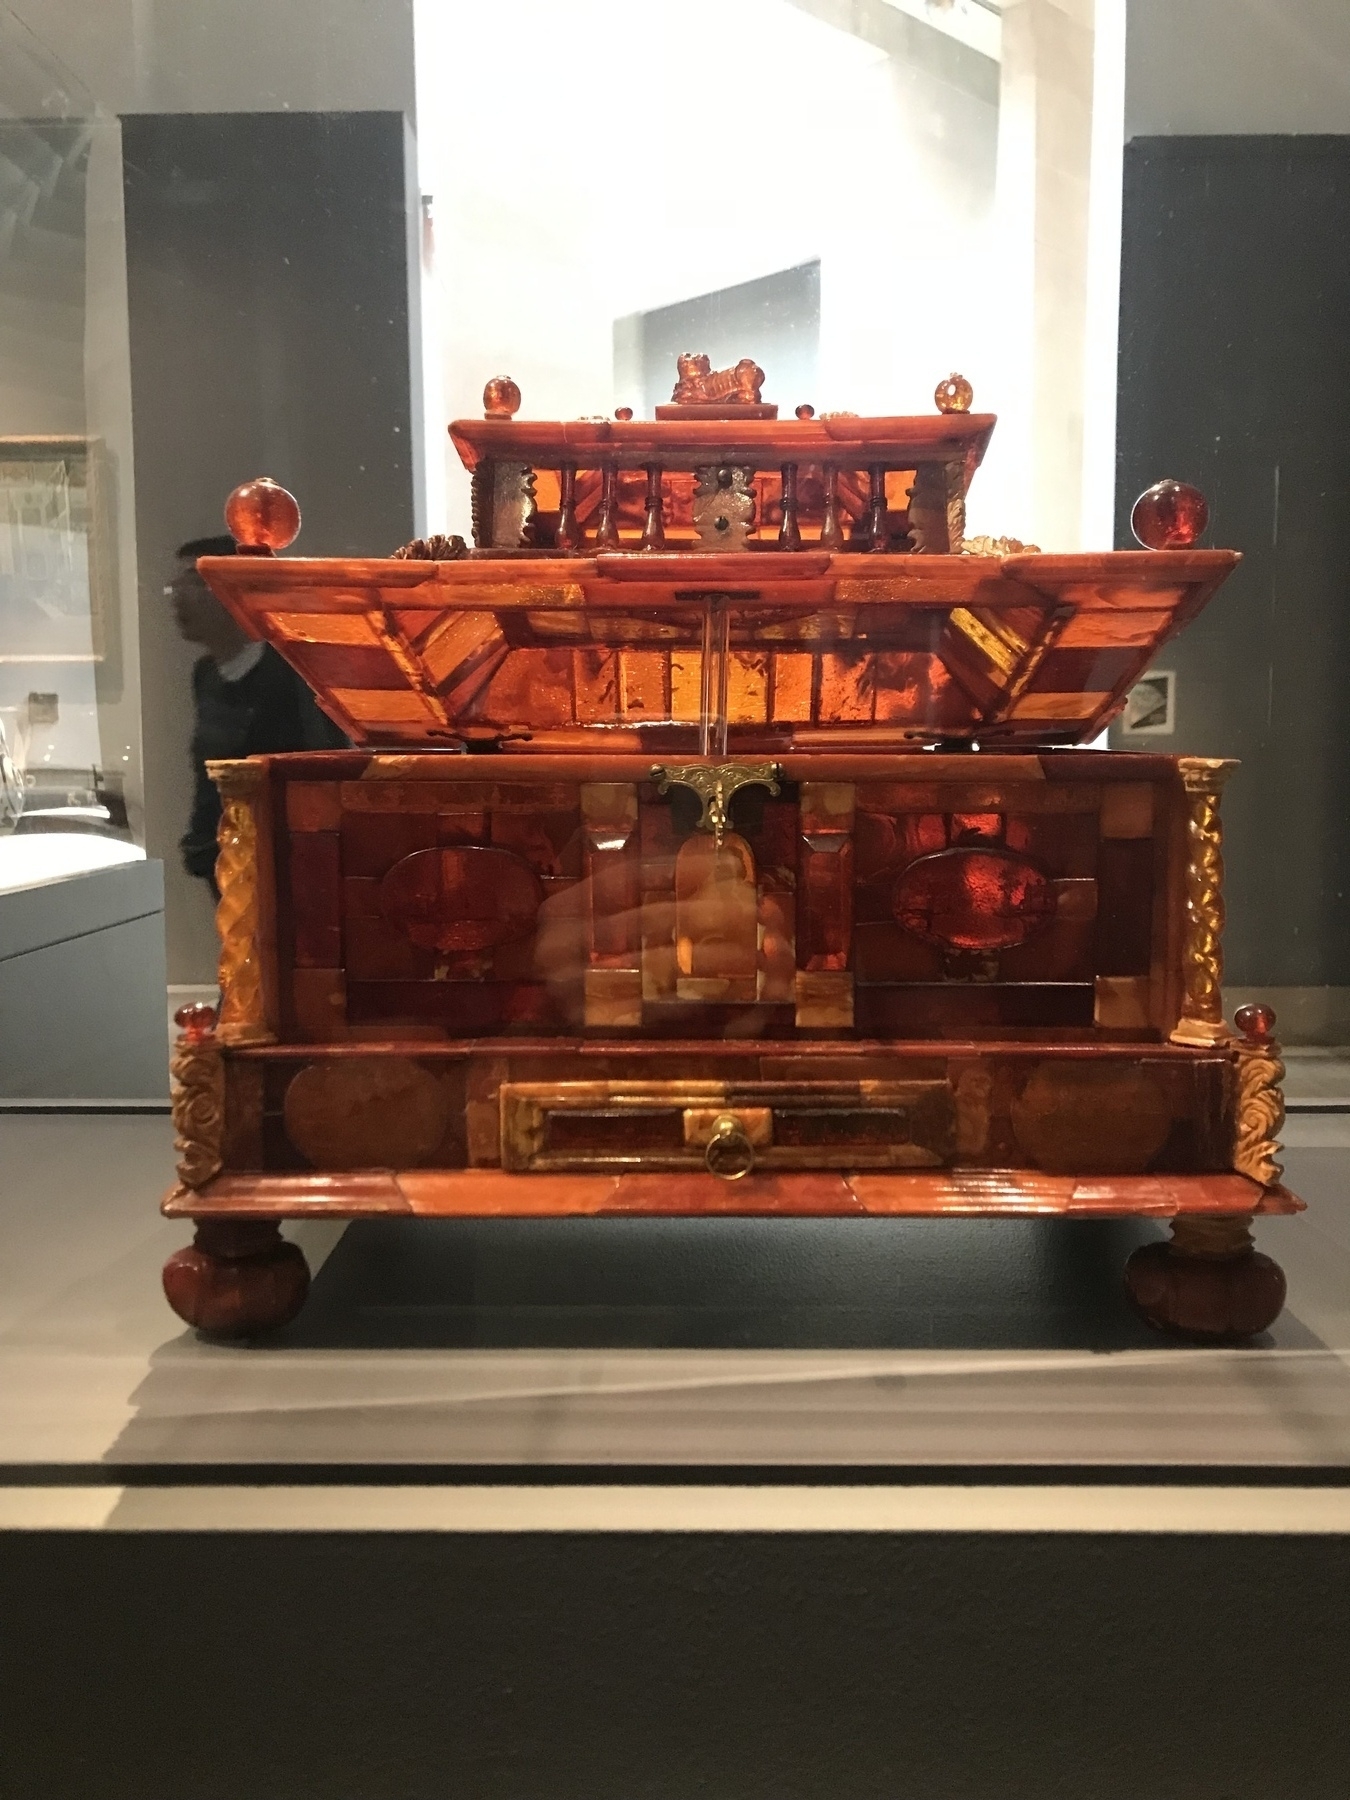 Small ornate chest in a museum, with lid propped open, made of panels of amber with light coming through